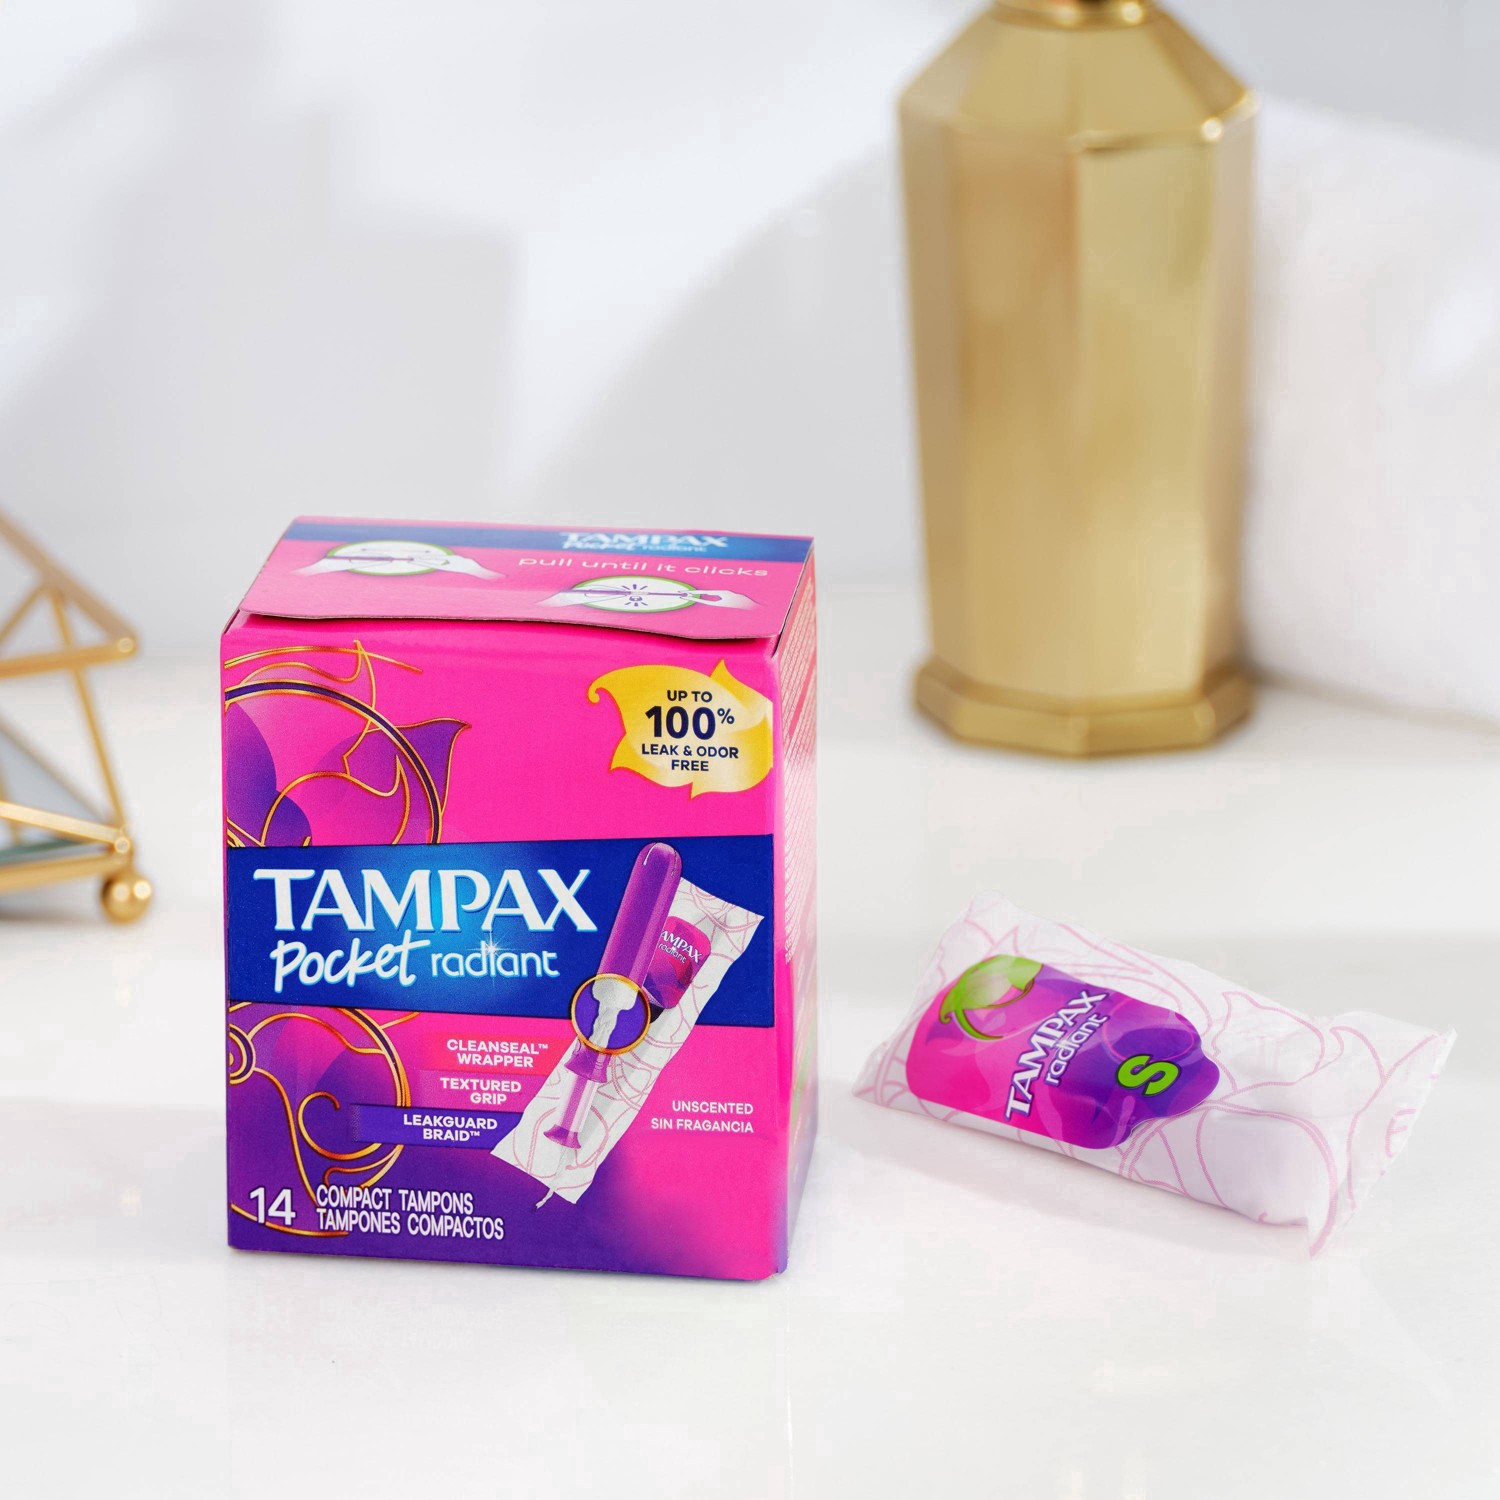 slide 79 of 94, Tampax Pocket Radiant Compact Plastic Tampons, With LeakGuard Braid, Super Absorbency, Unscented, 28 Count, 28 ct